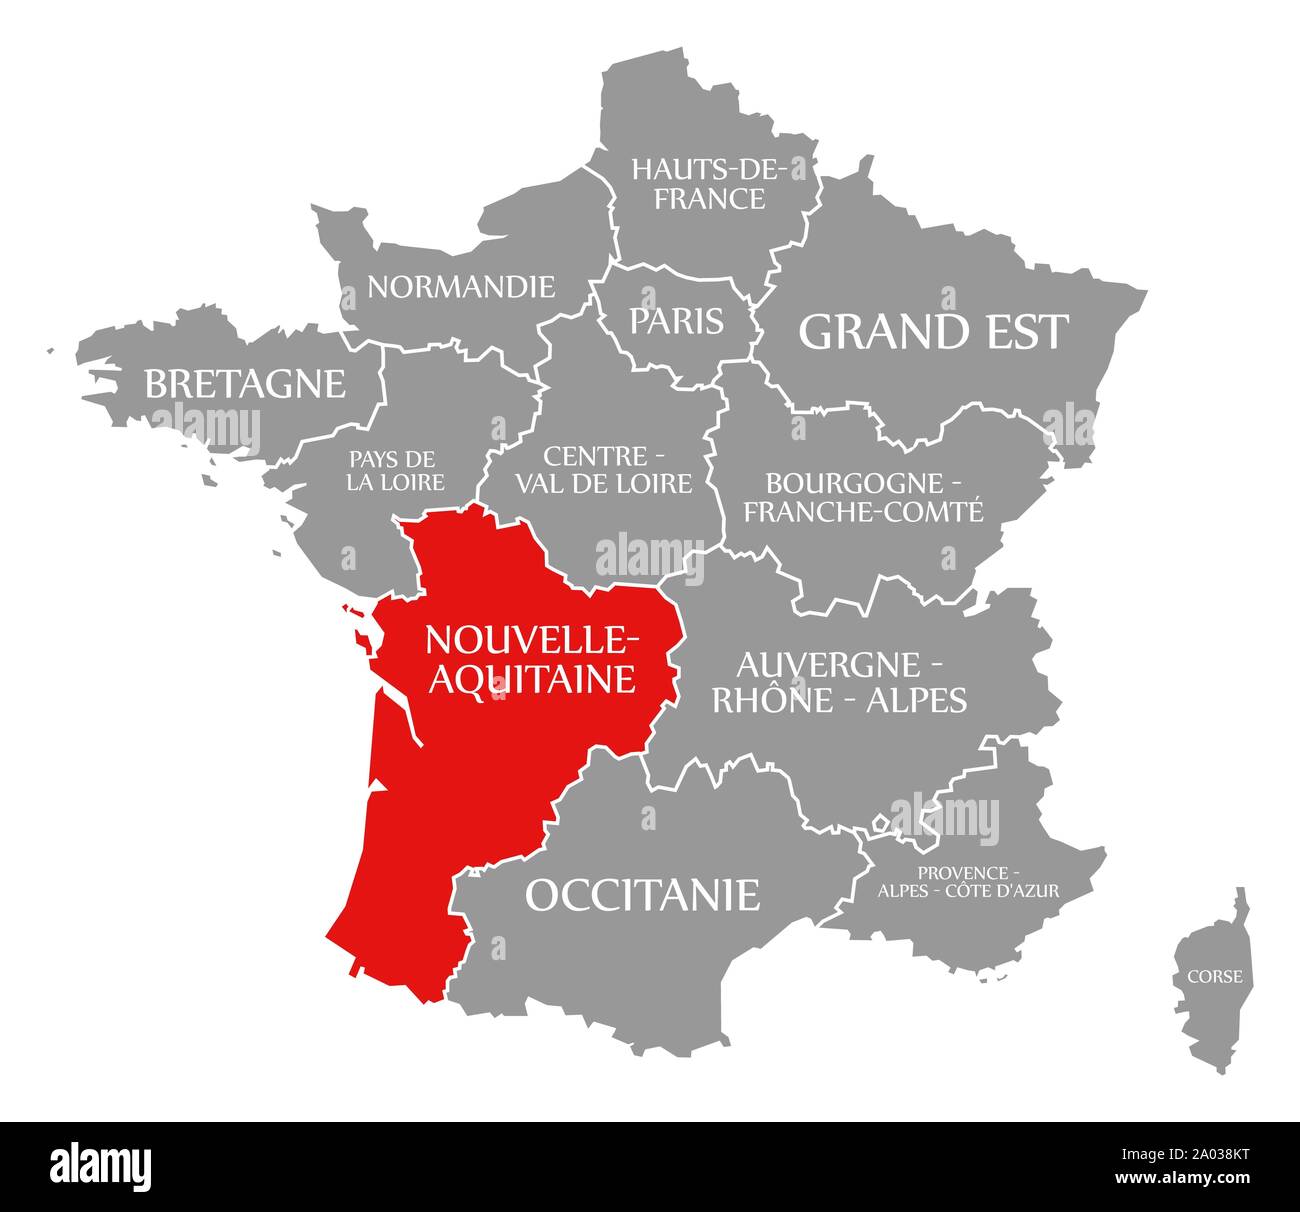 Nouvelle-Aquitaine red highlighted in map of France Stock Photo